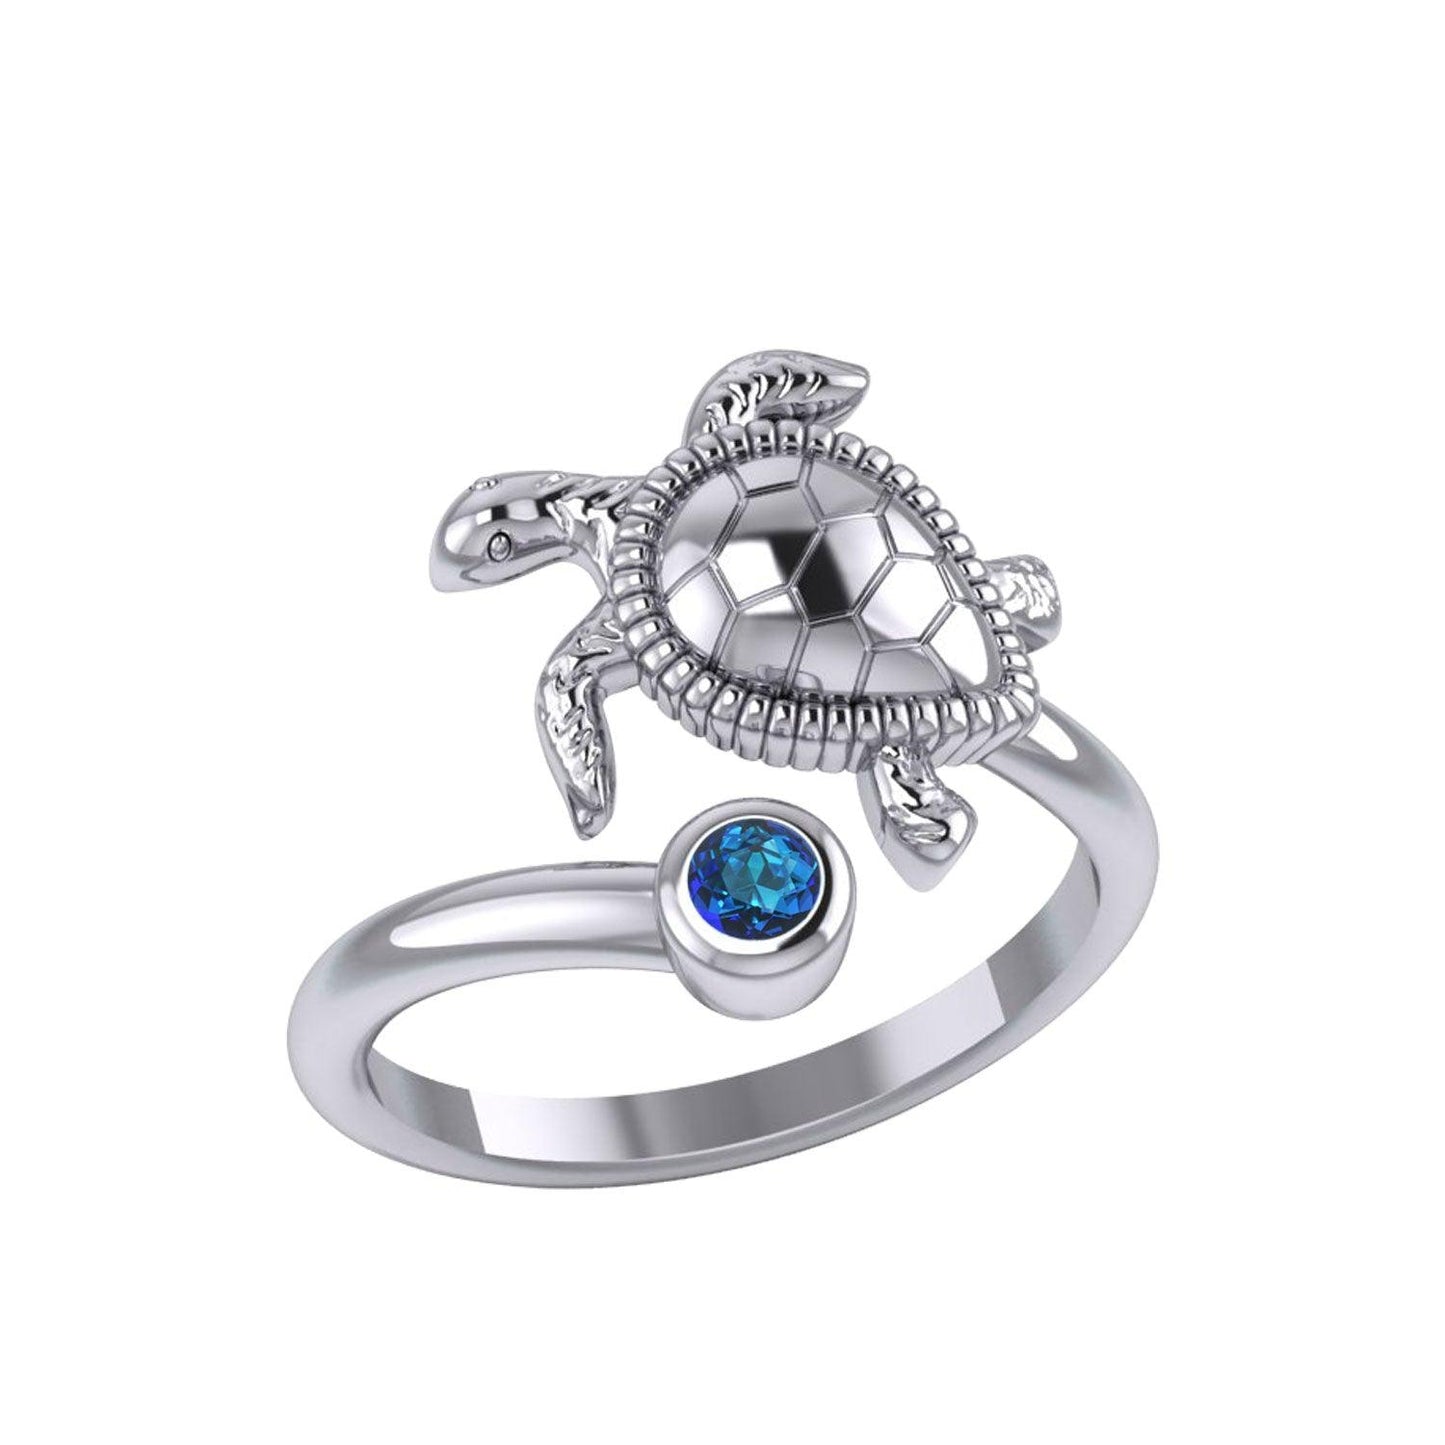 Turtle Sterling Silver with Gemstone Ring TRI2343 - peterstone.dropshipping